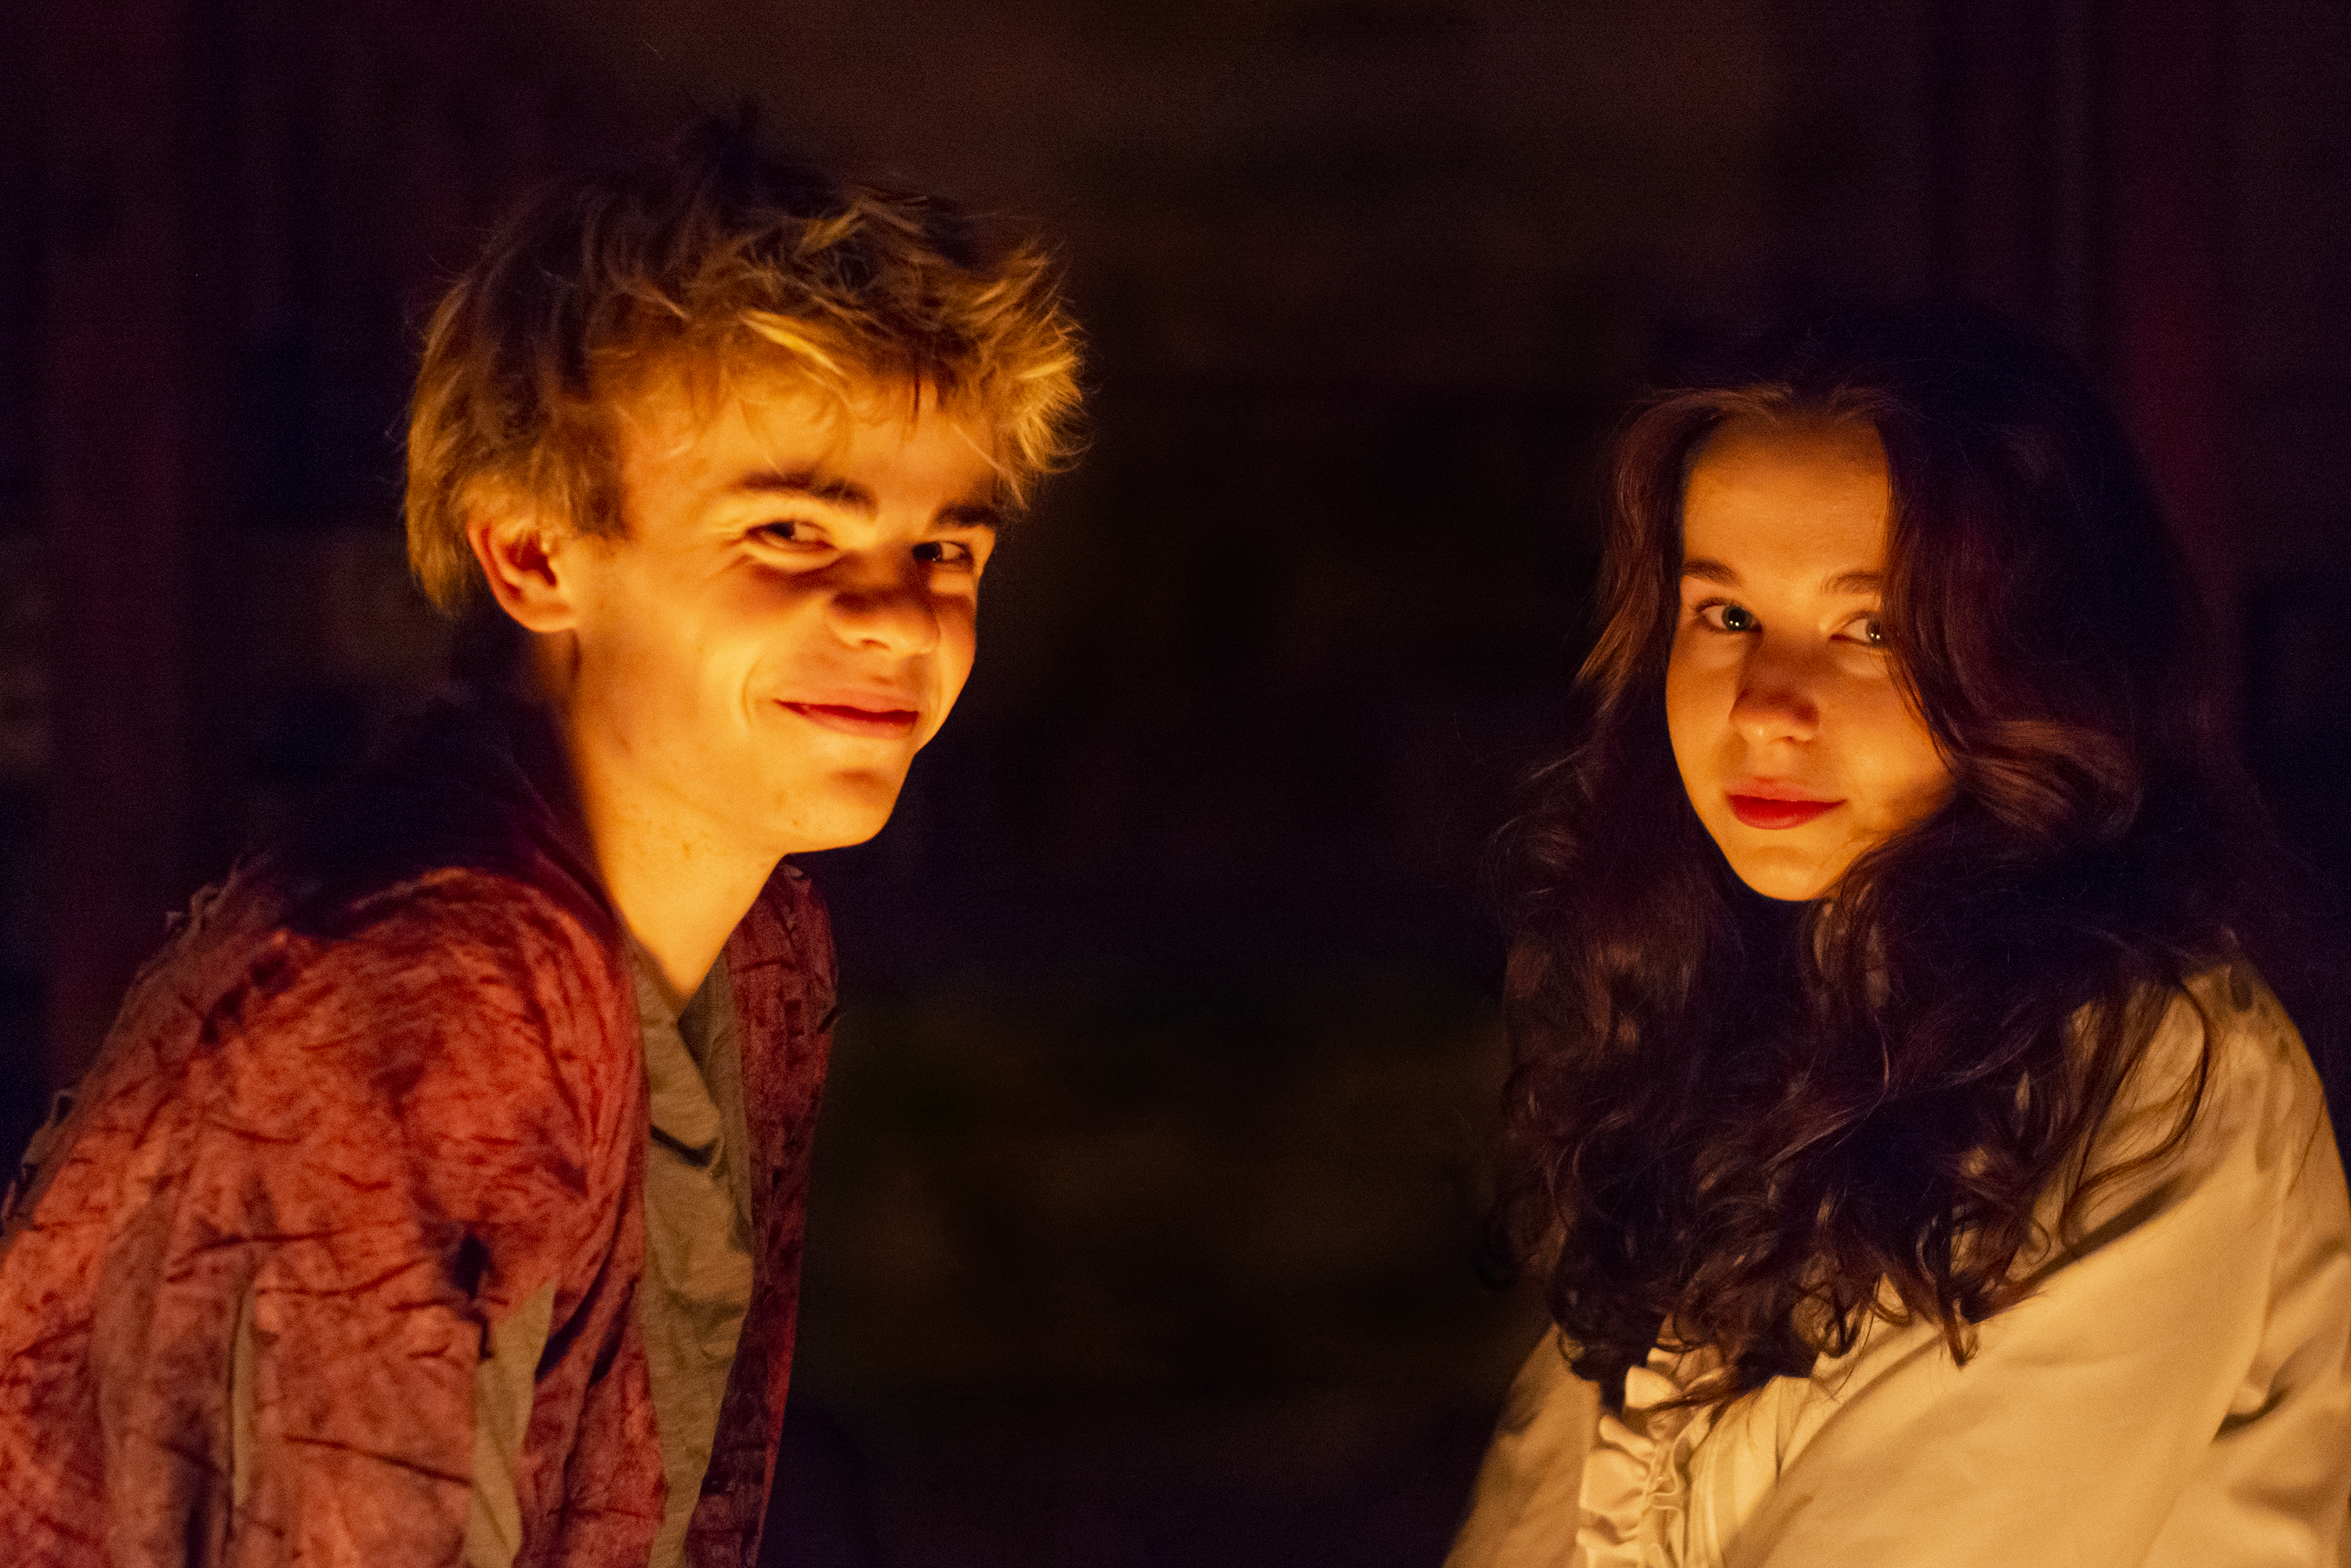 Peter Pan (Rohan Lilien) and Wendy (Sophia Furshpan) meet for the first time.